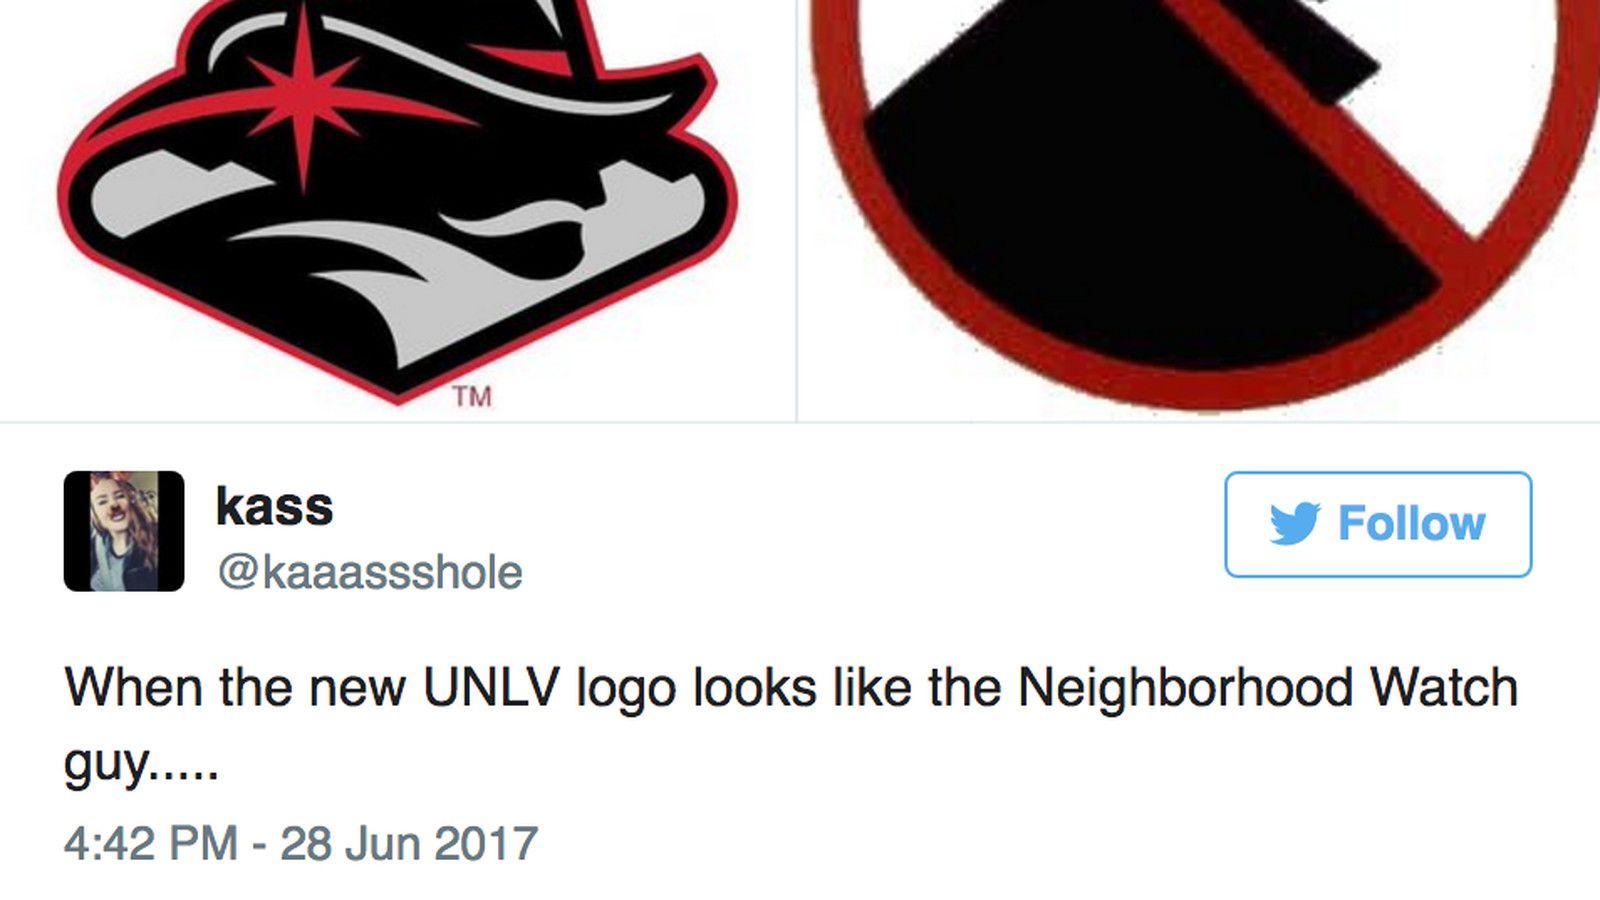 UNLV Logo - What does UNLV's complicated new logo look like to you?